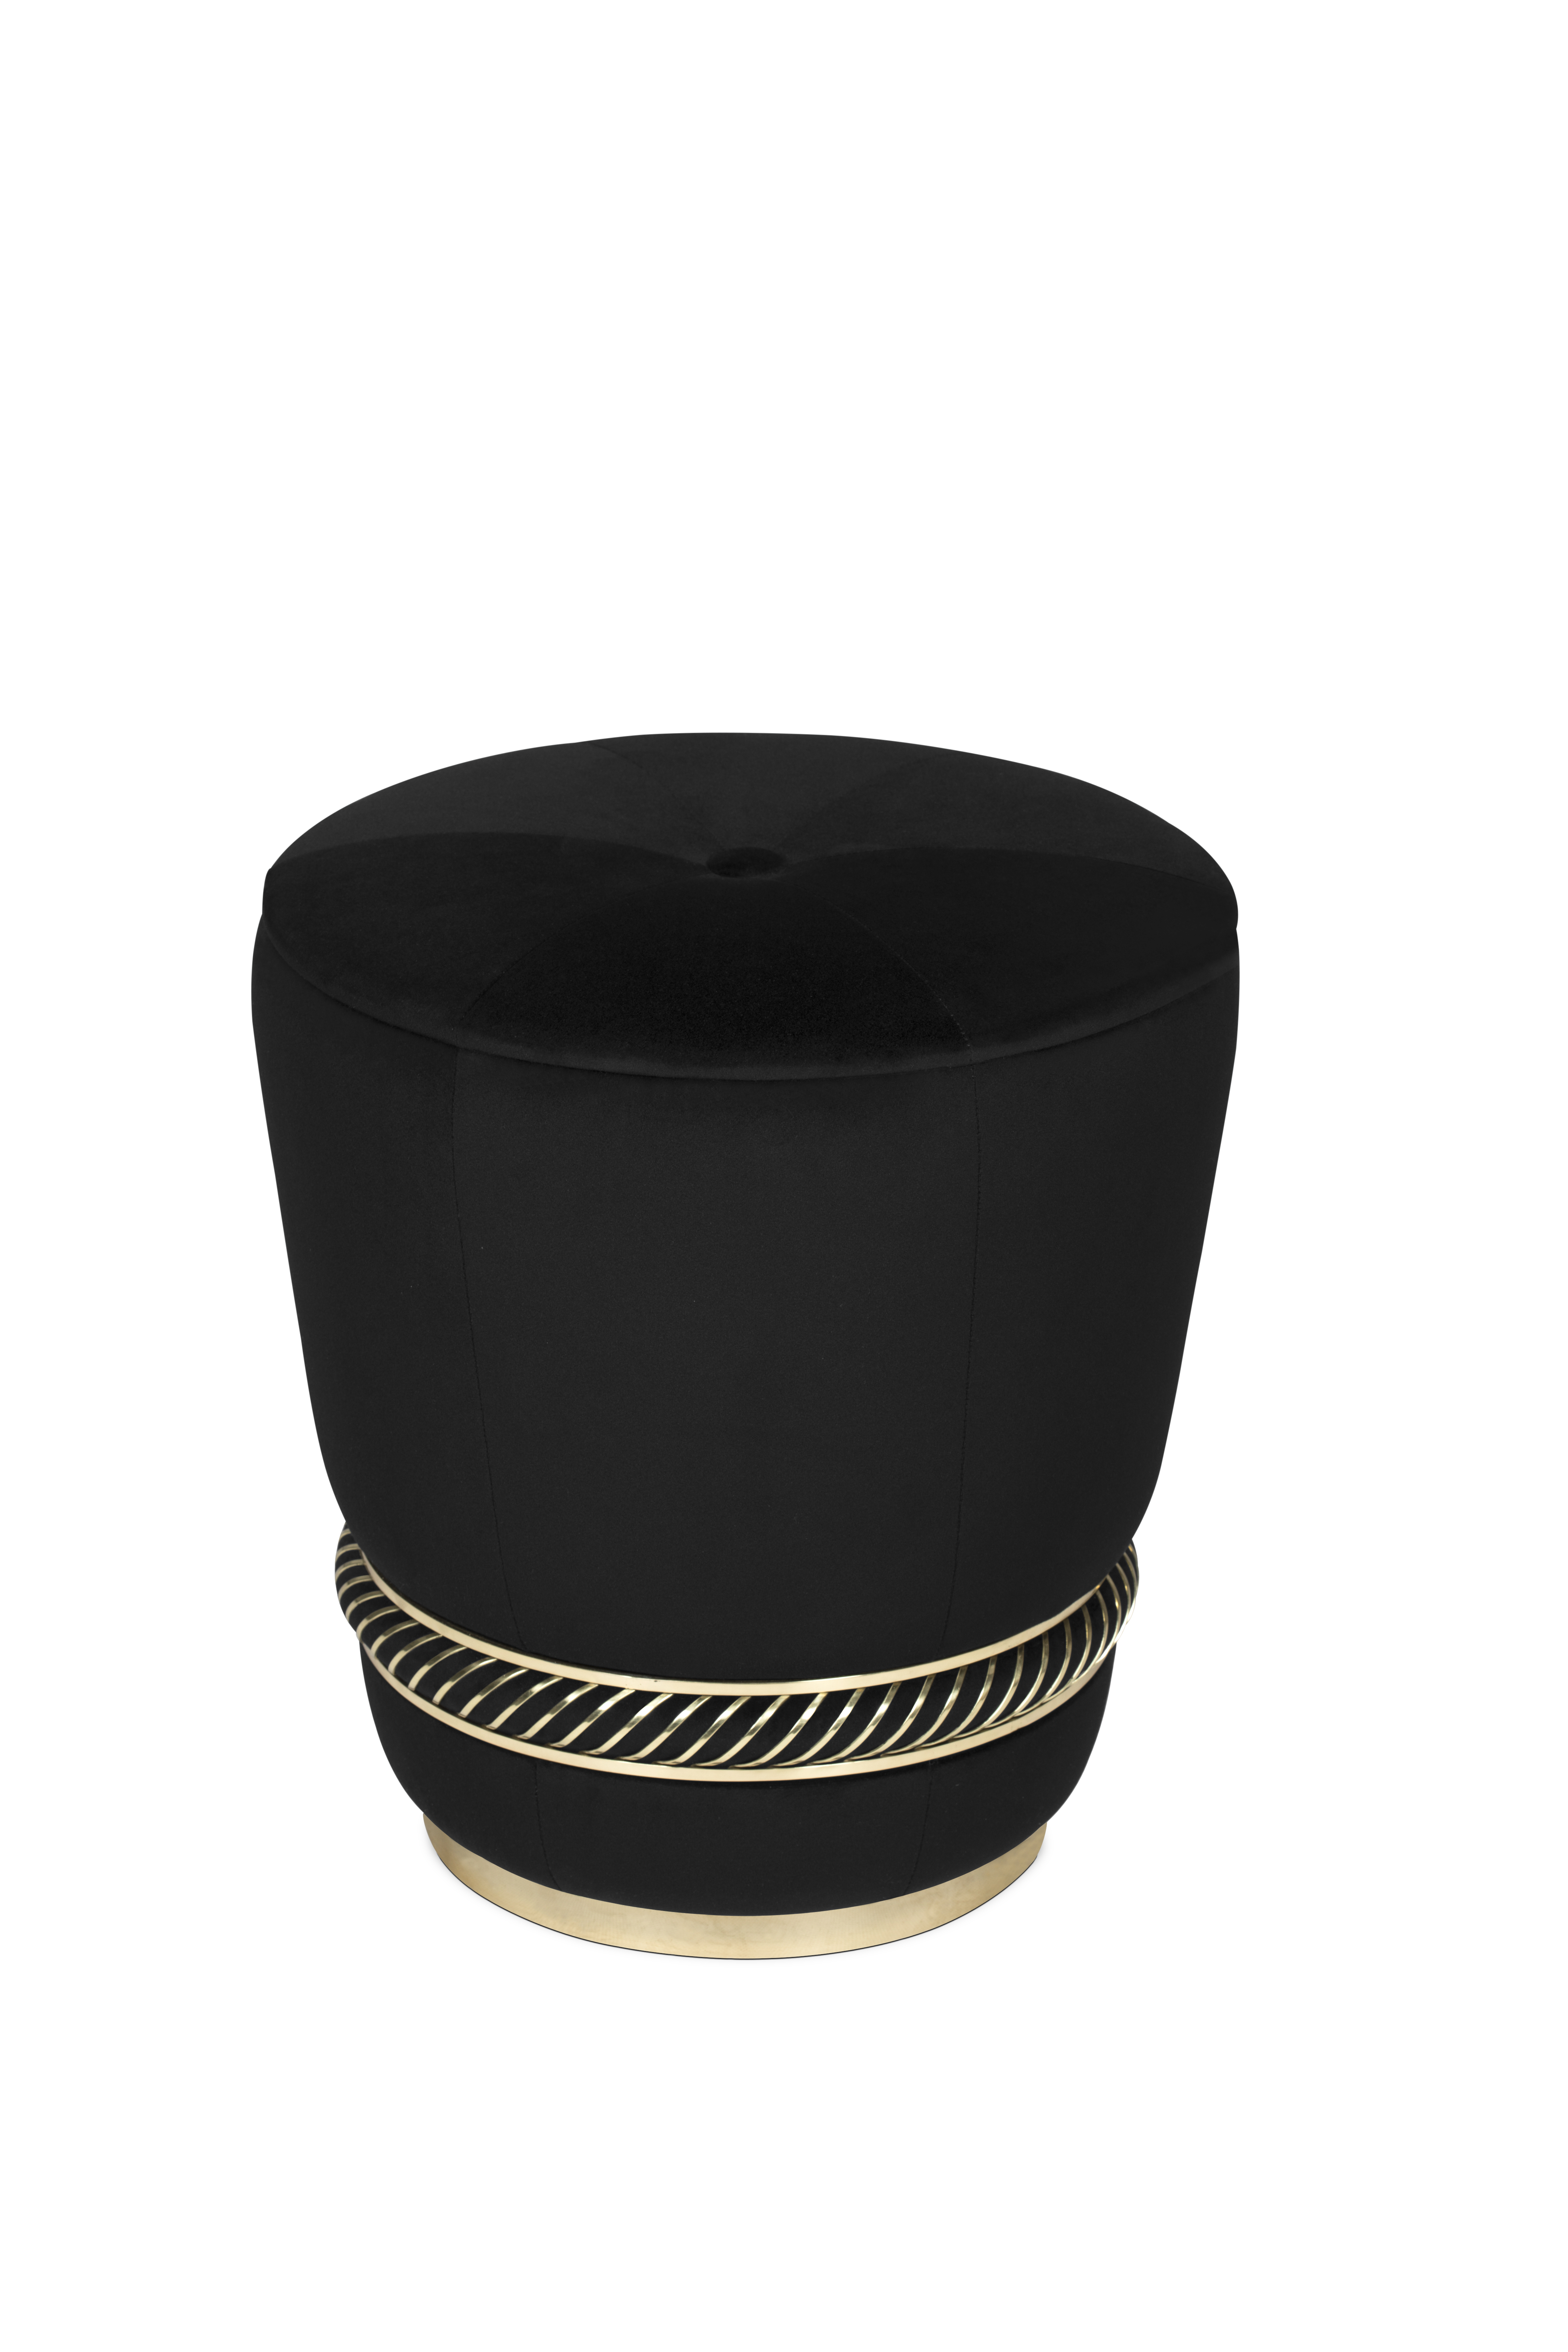 October Must-Haves: Noir Stool by Maison Valentina October October Must-Haves: Bathroom Edition noir stool 1 HR